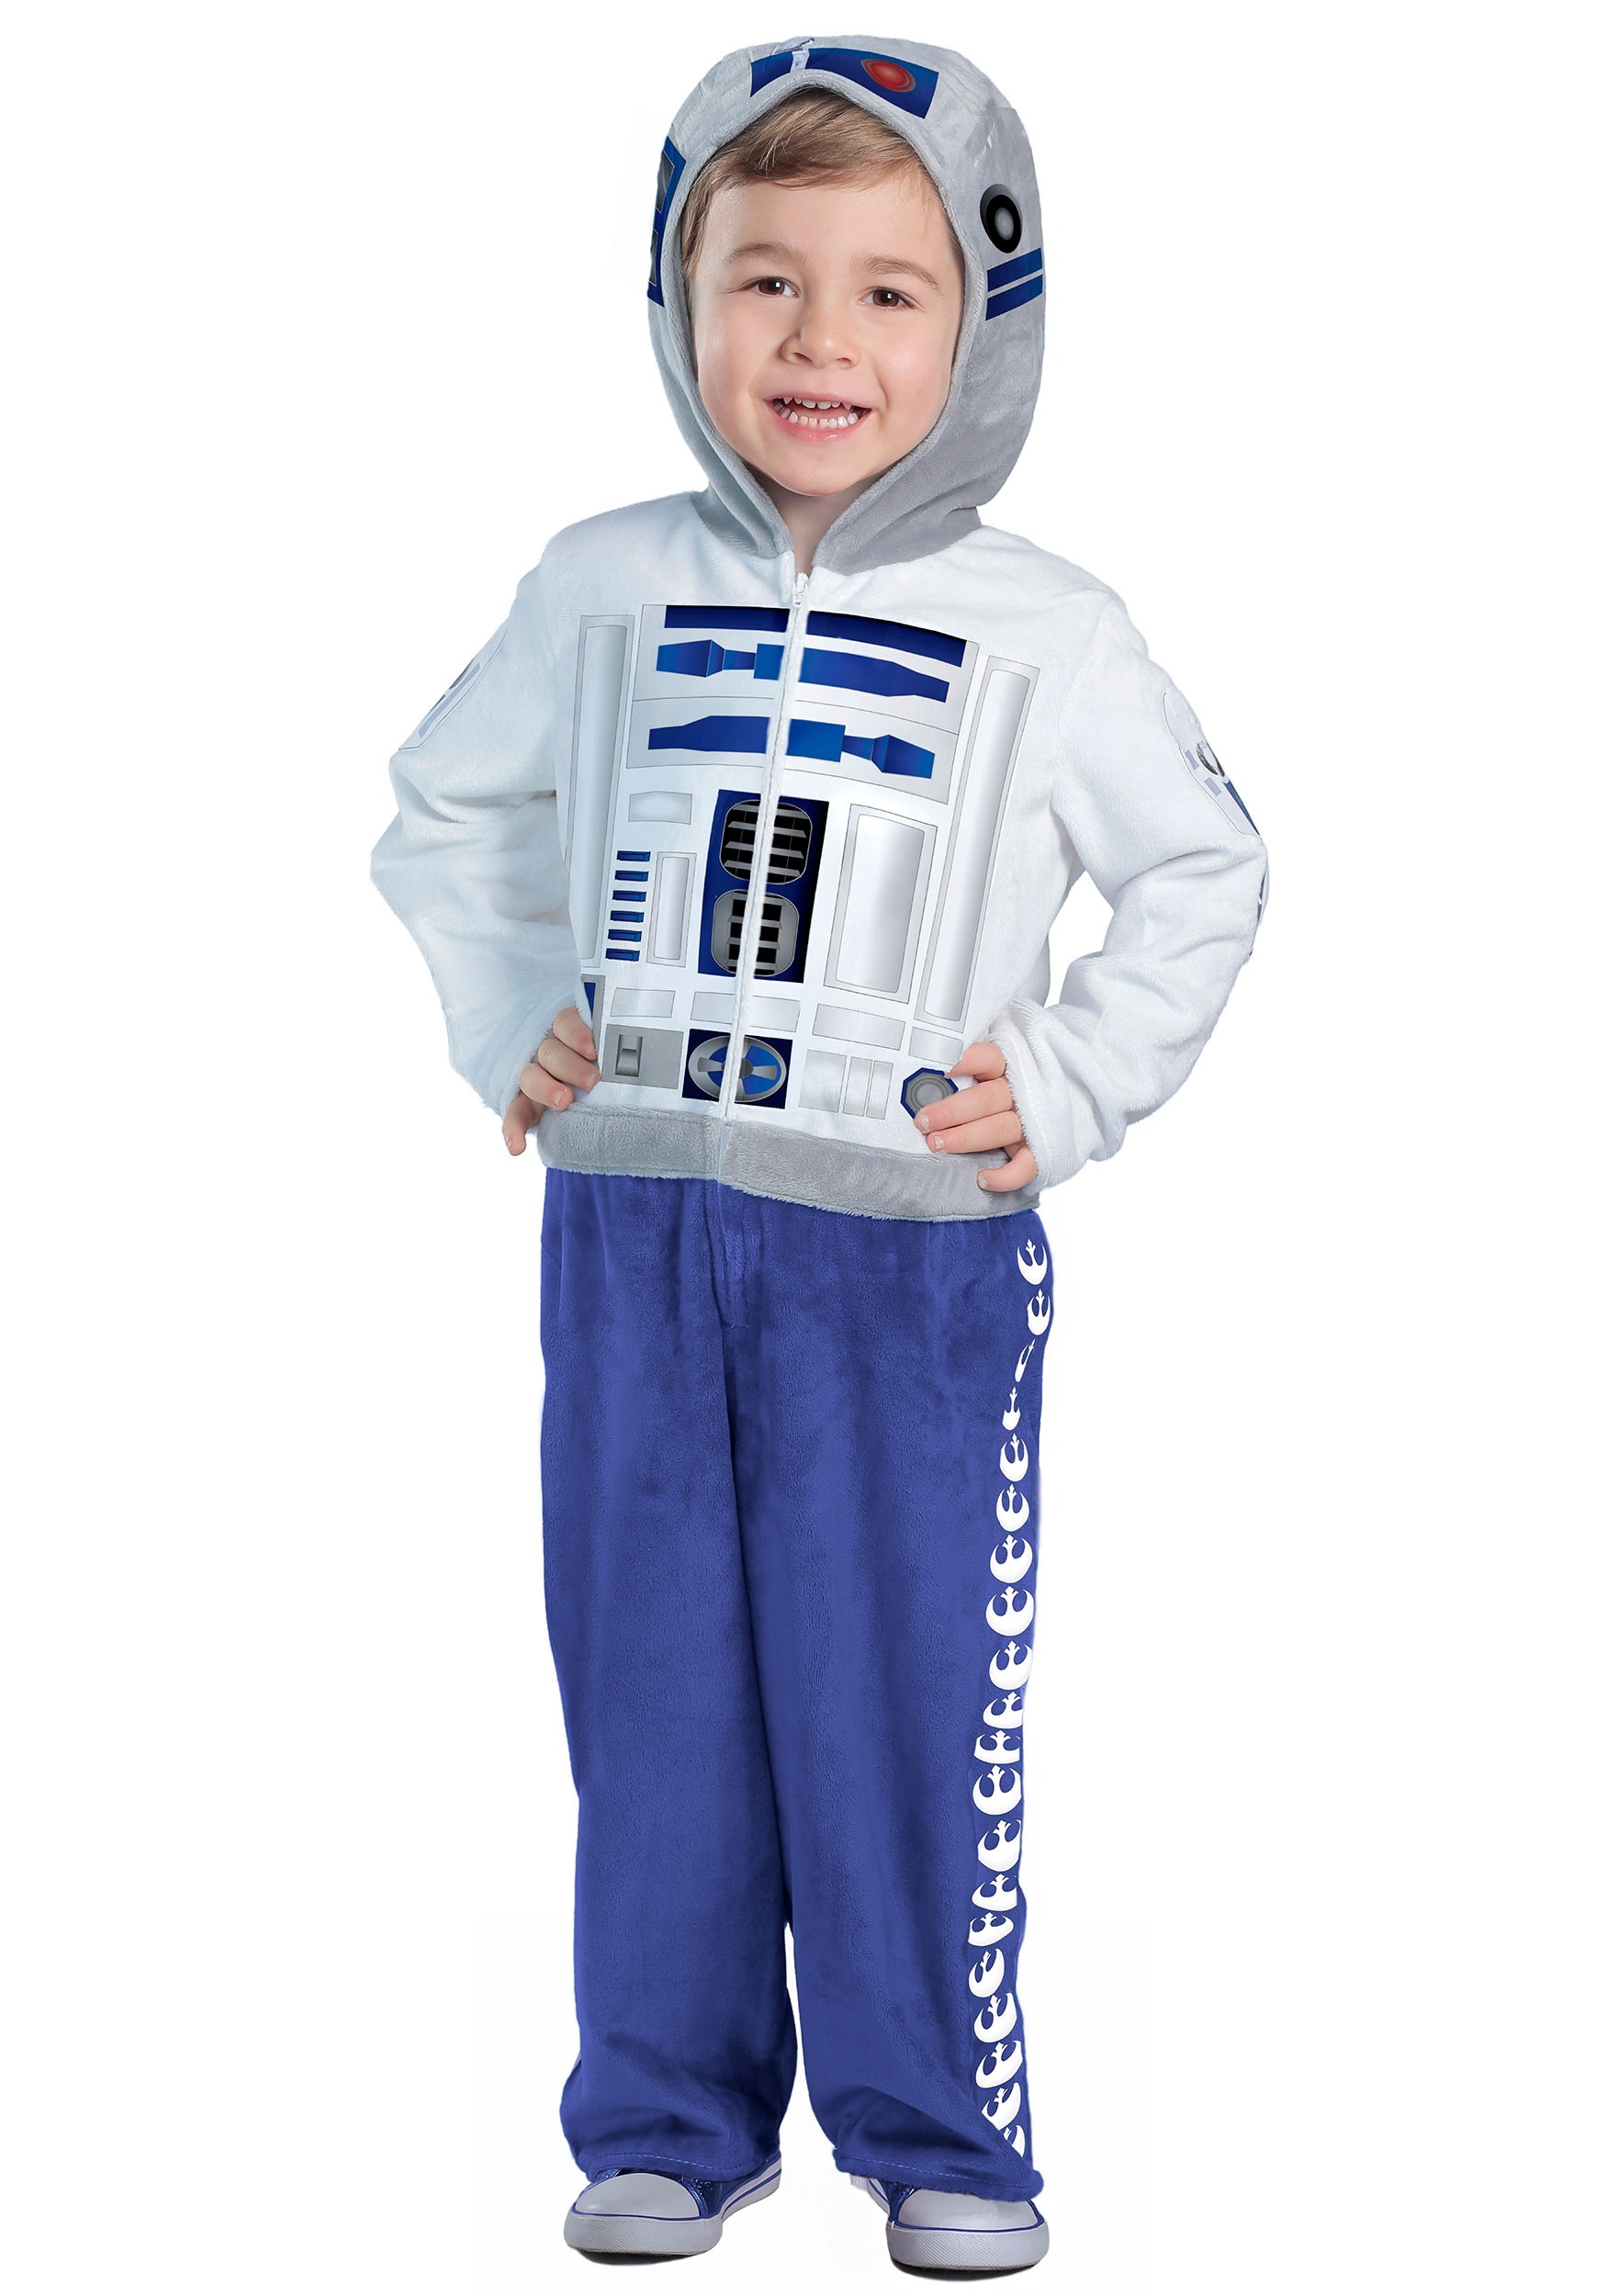 Deluxe R2D2 Costume for Toddlers